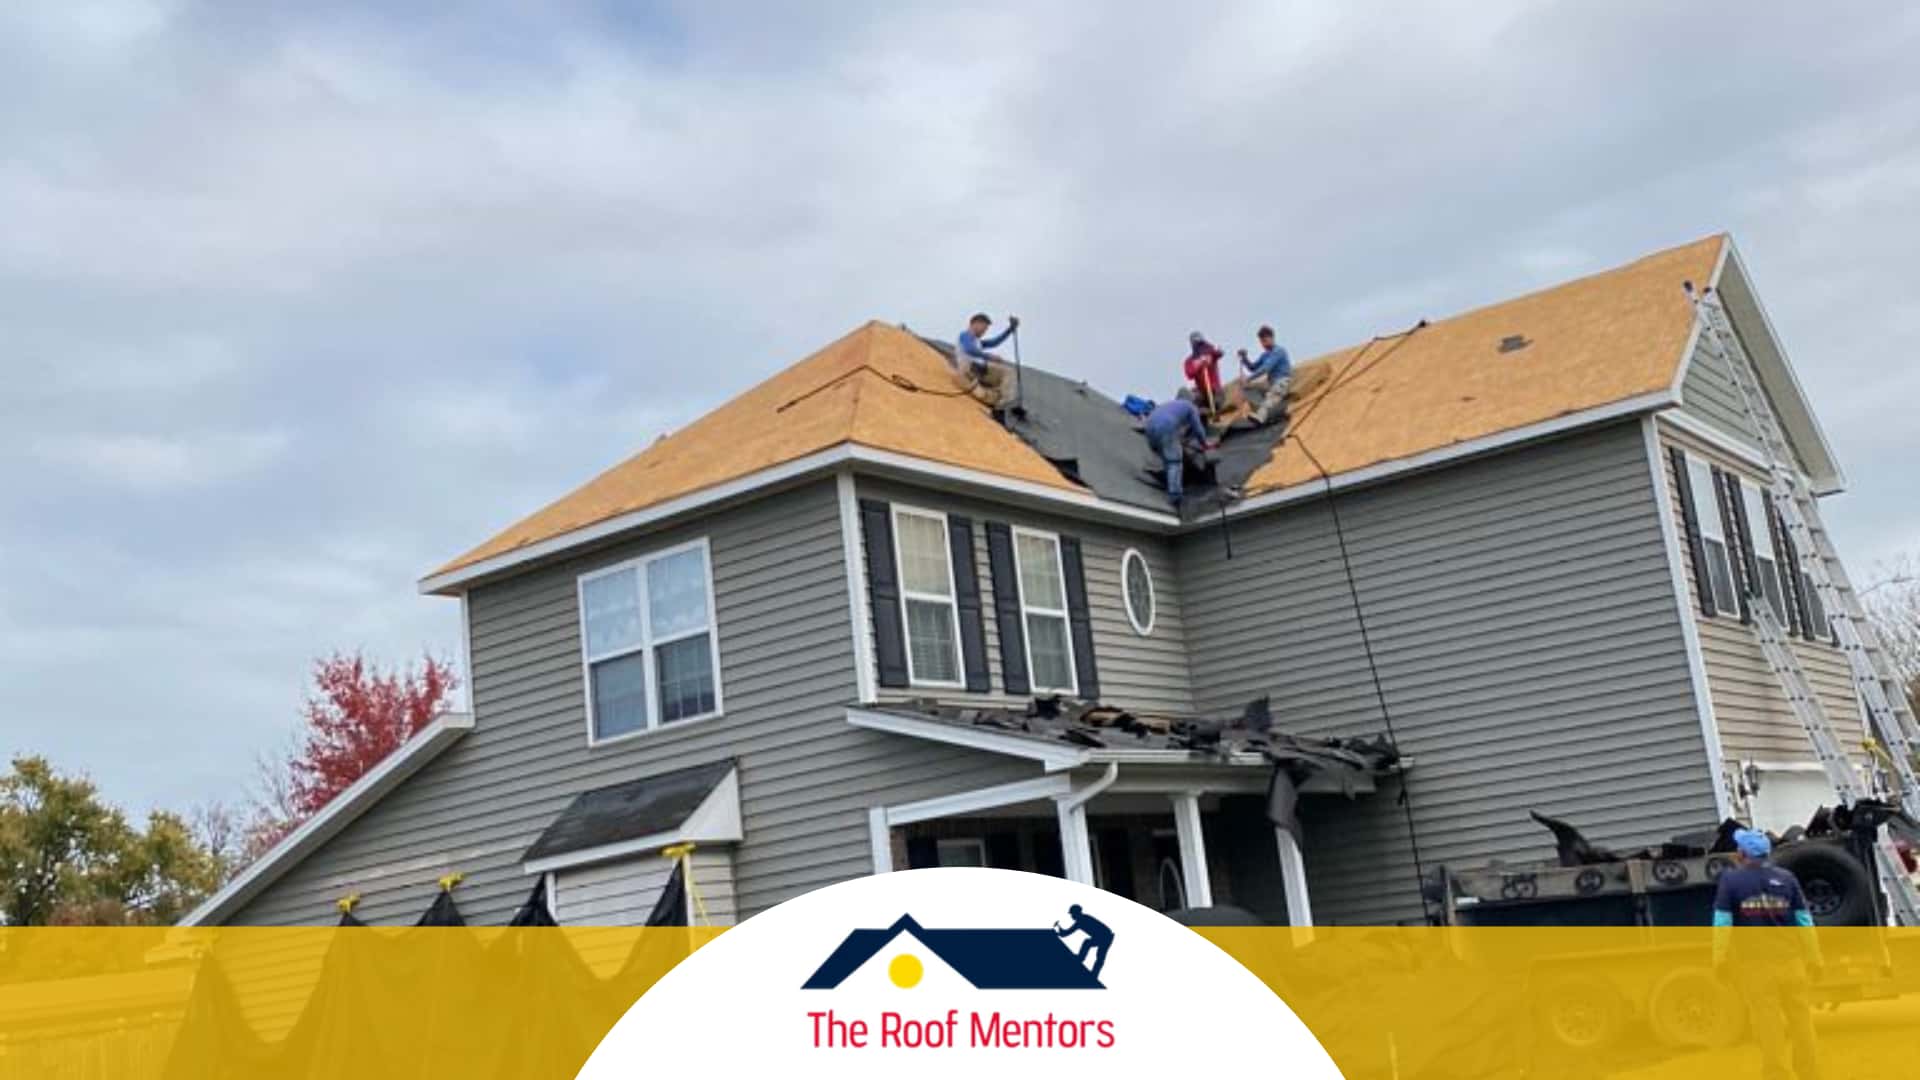 A group of roofing contractors are working on the roof of a house.